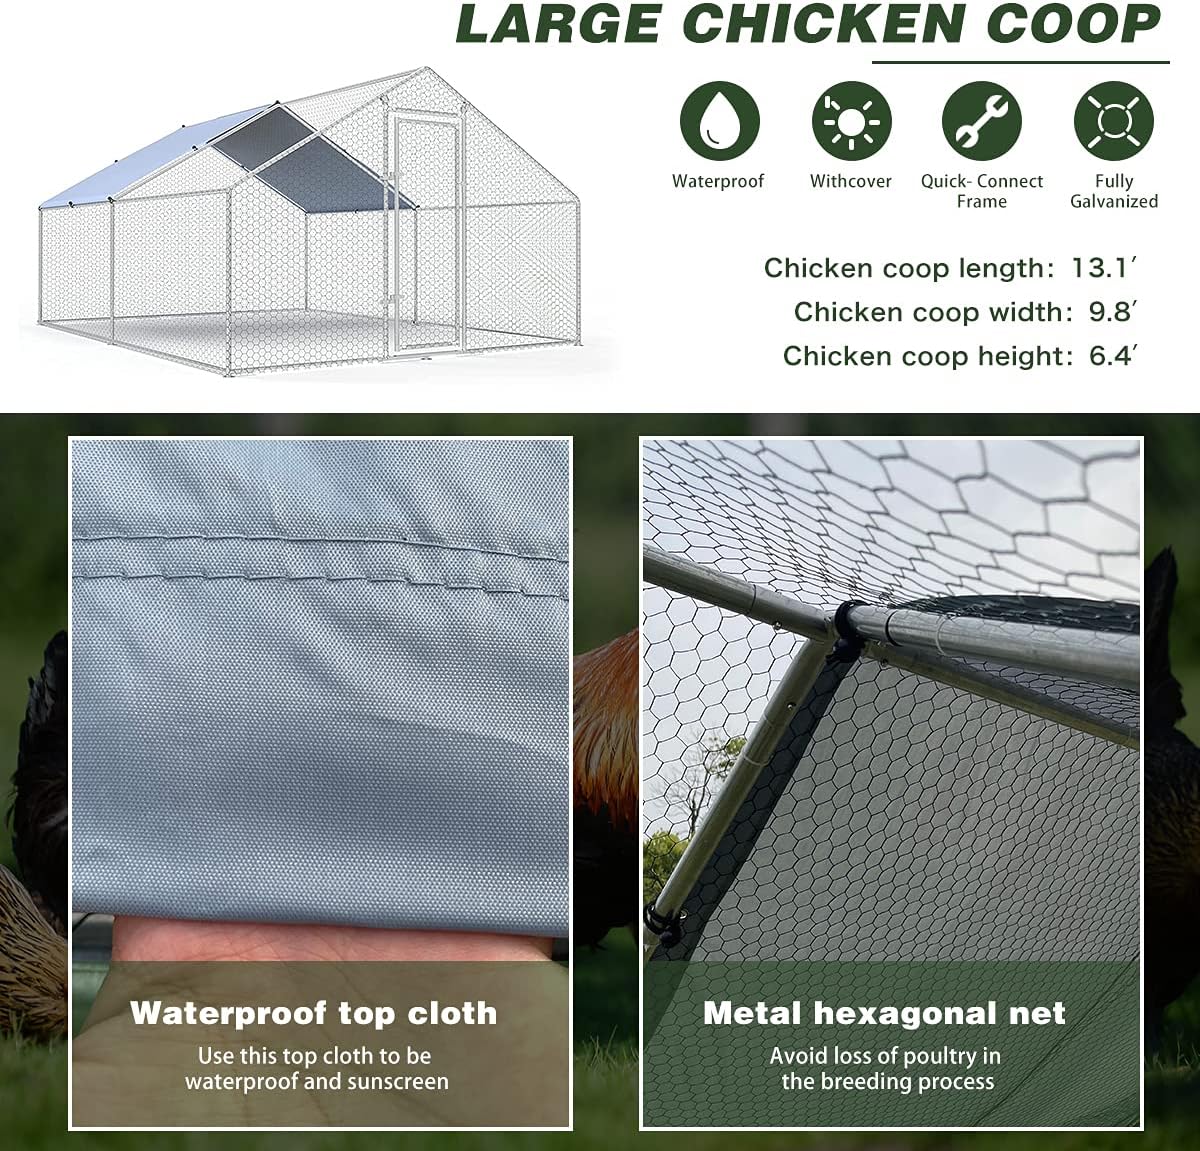 Large Metal Chicken Coop Walk-in Poultry Cage Chicken Run Pen Dog Kennel Duck House with Waterproof and Anti-Ultraviolet Cover for Outdoor Farm Use(9.8′ L x 13.1′ W x 6.4′ H) review